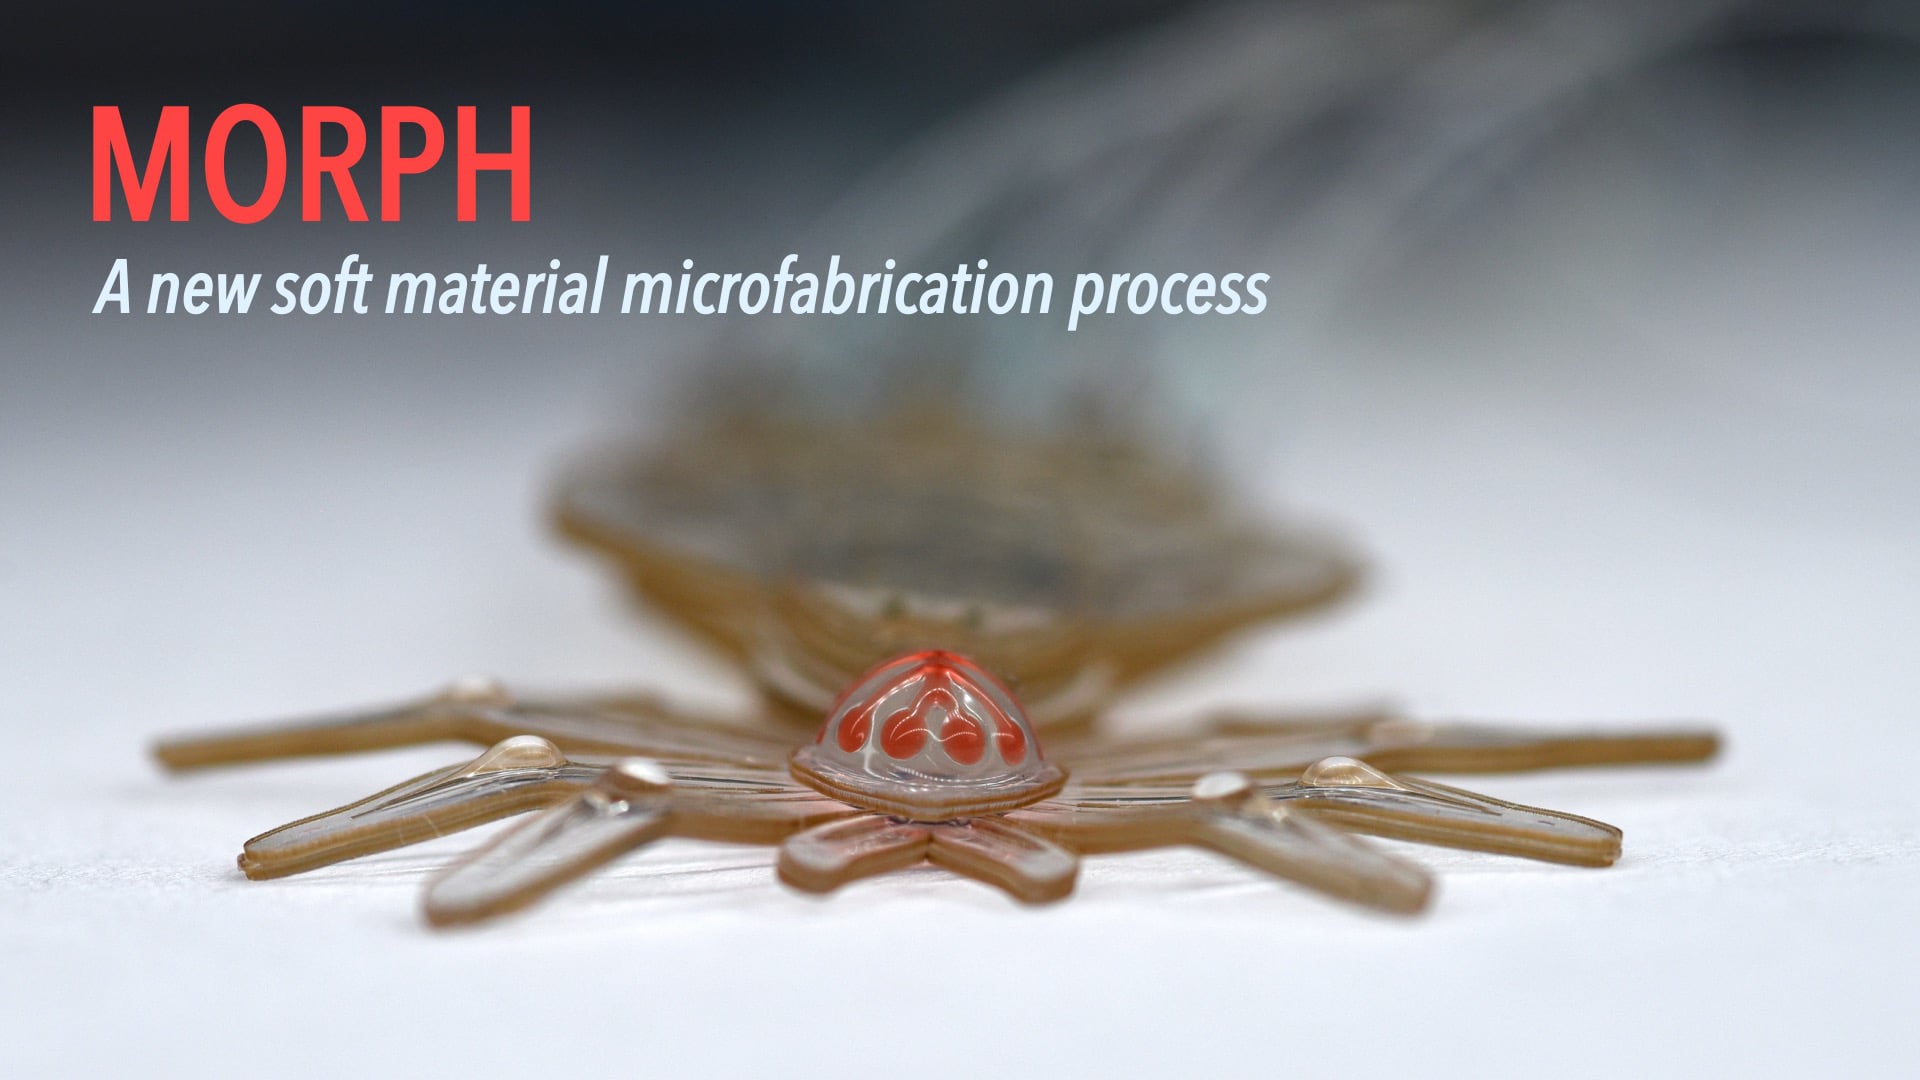 MORPH: A new soft material microfabrication process